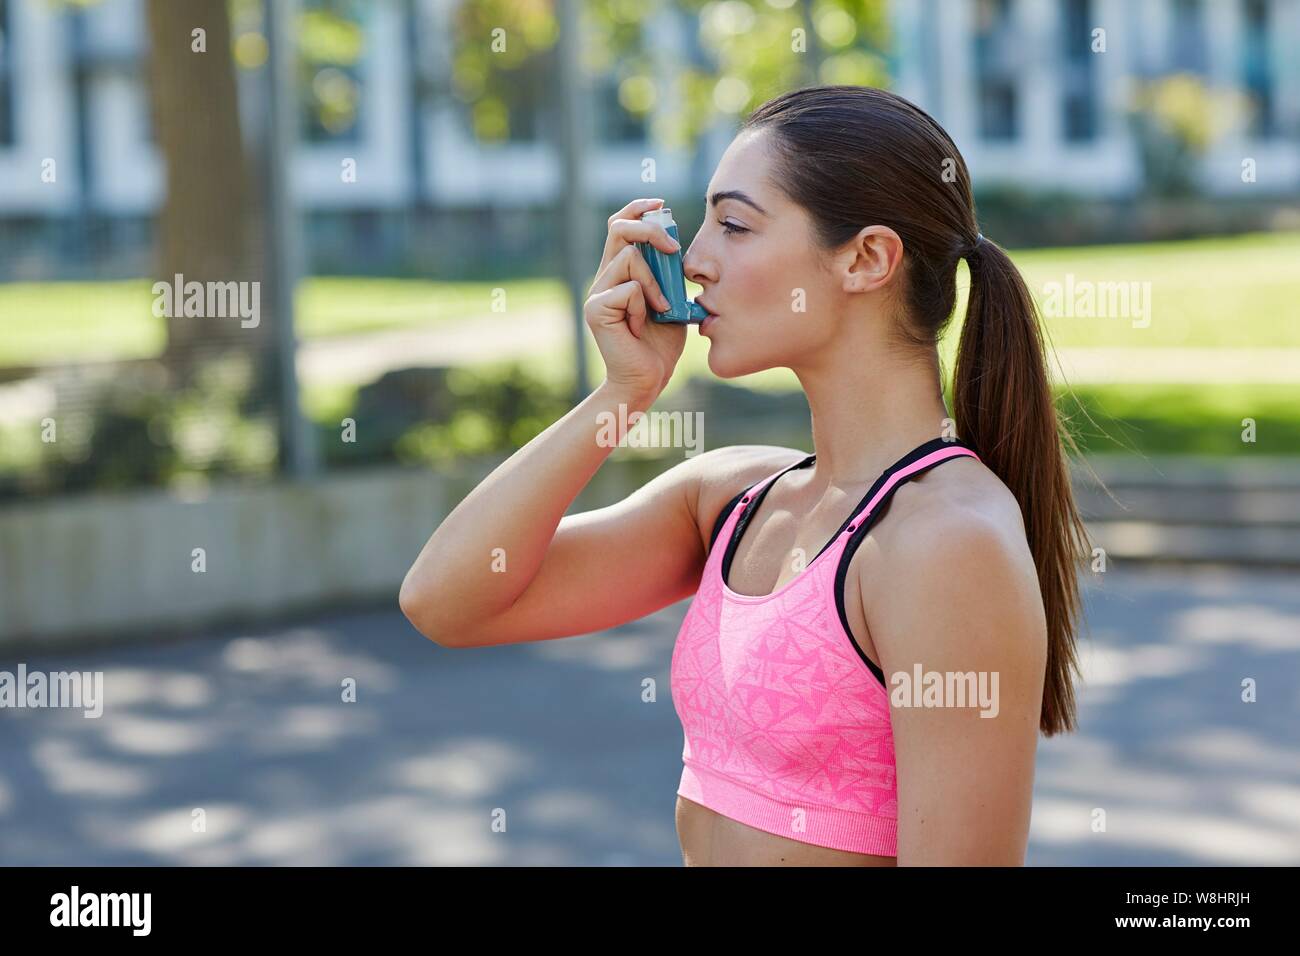 Young woman in sports crop top using an inhaler. Stock Photo